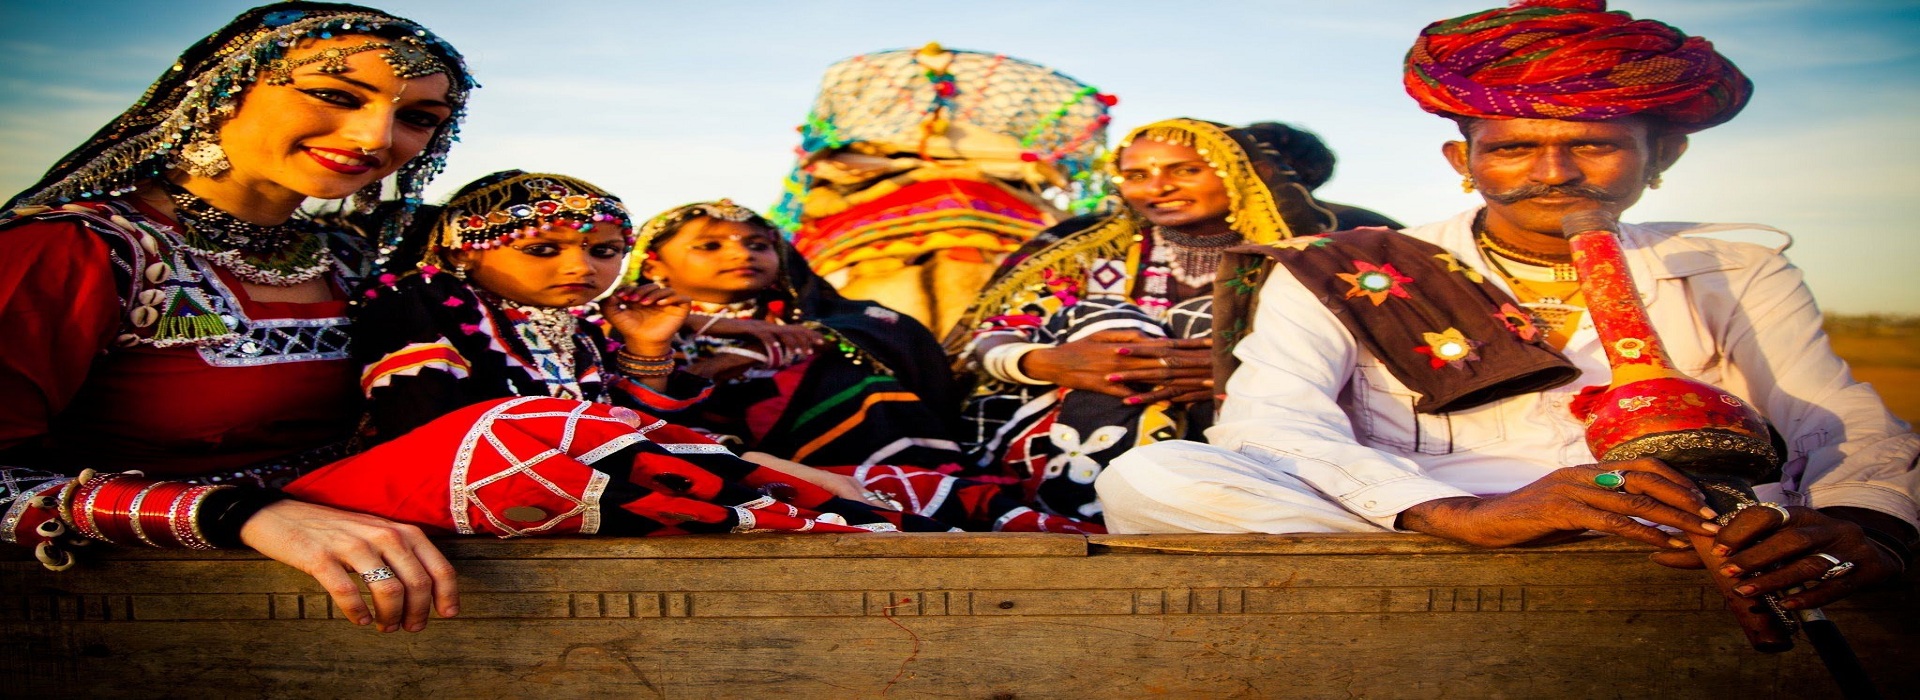 The Culture and Traditions of Rajasthan